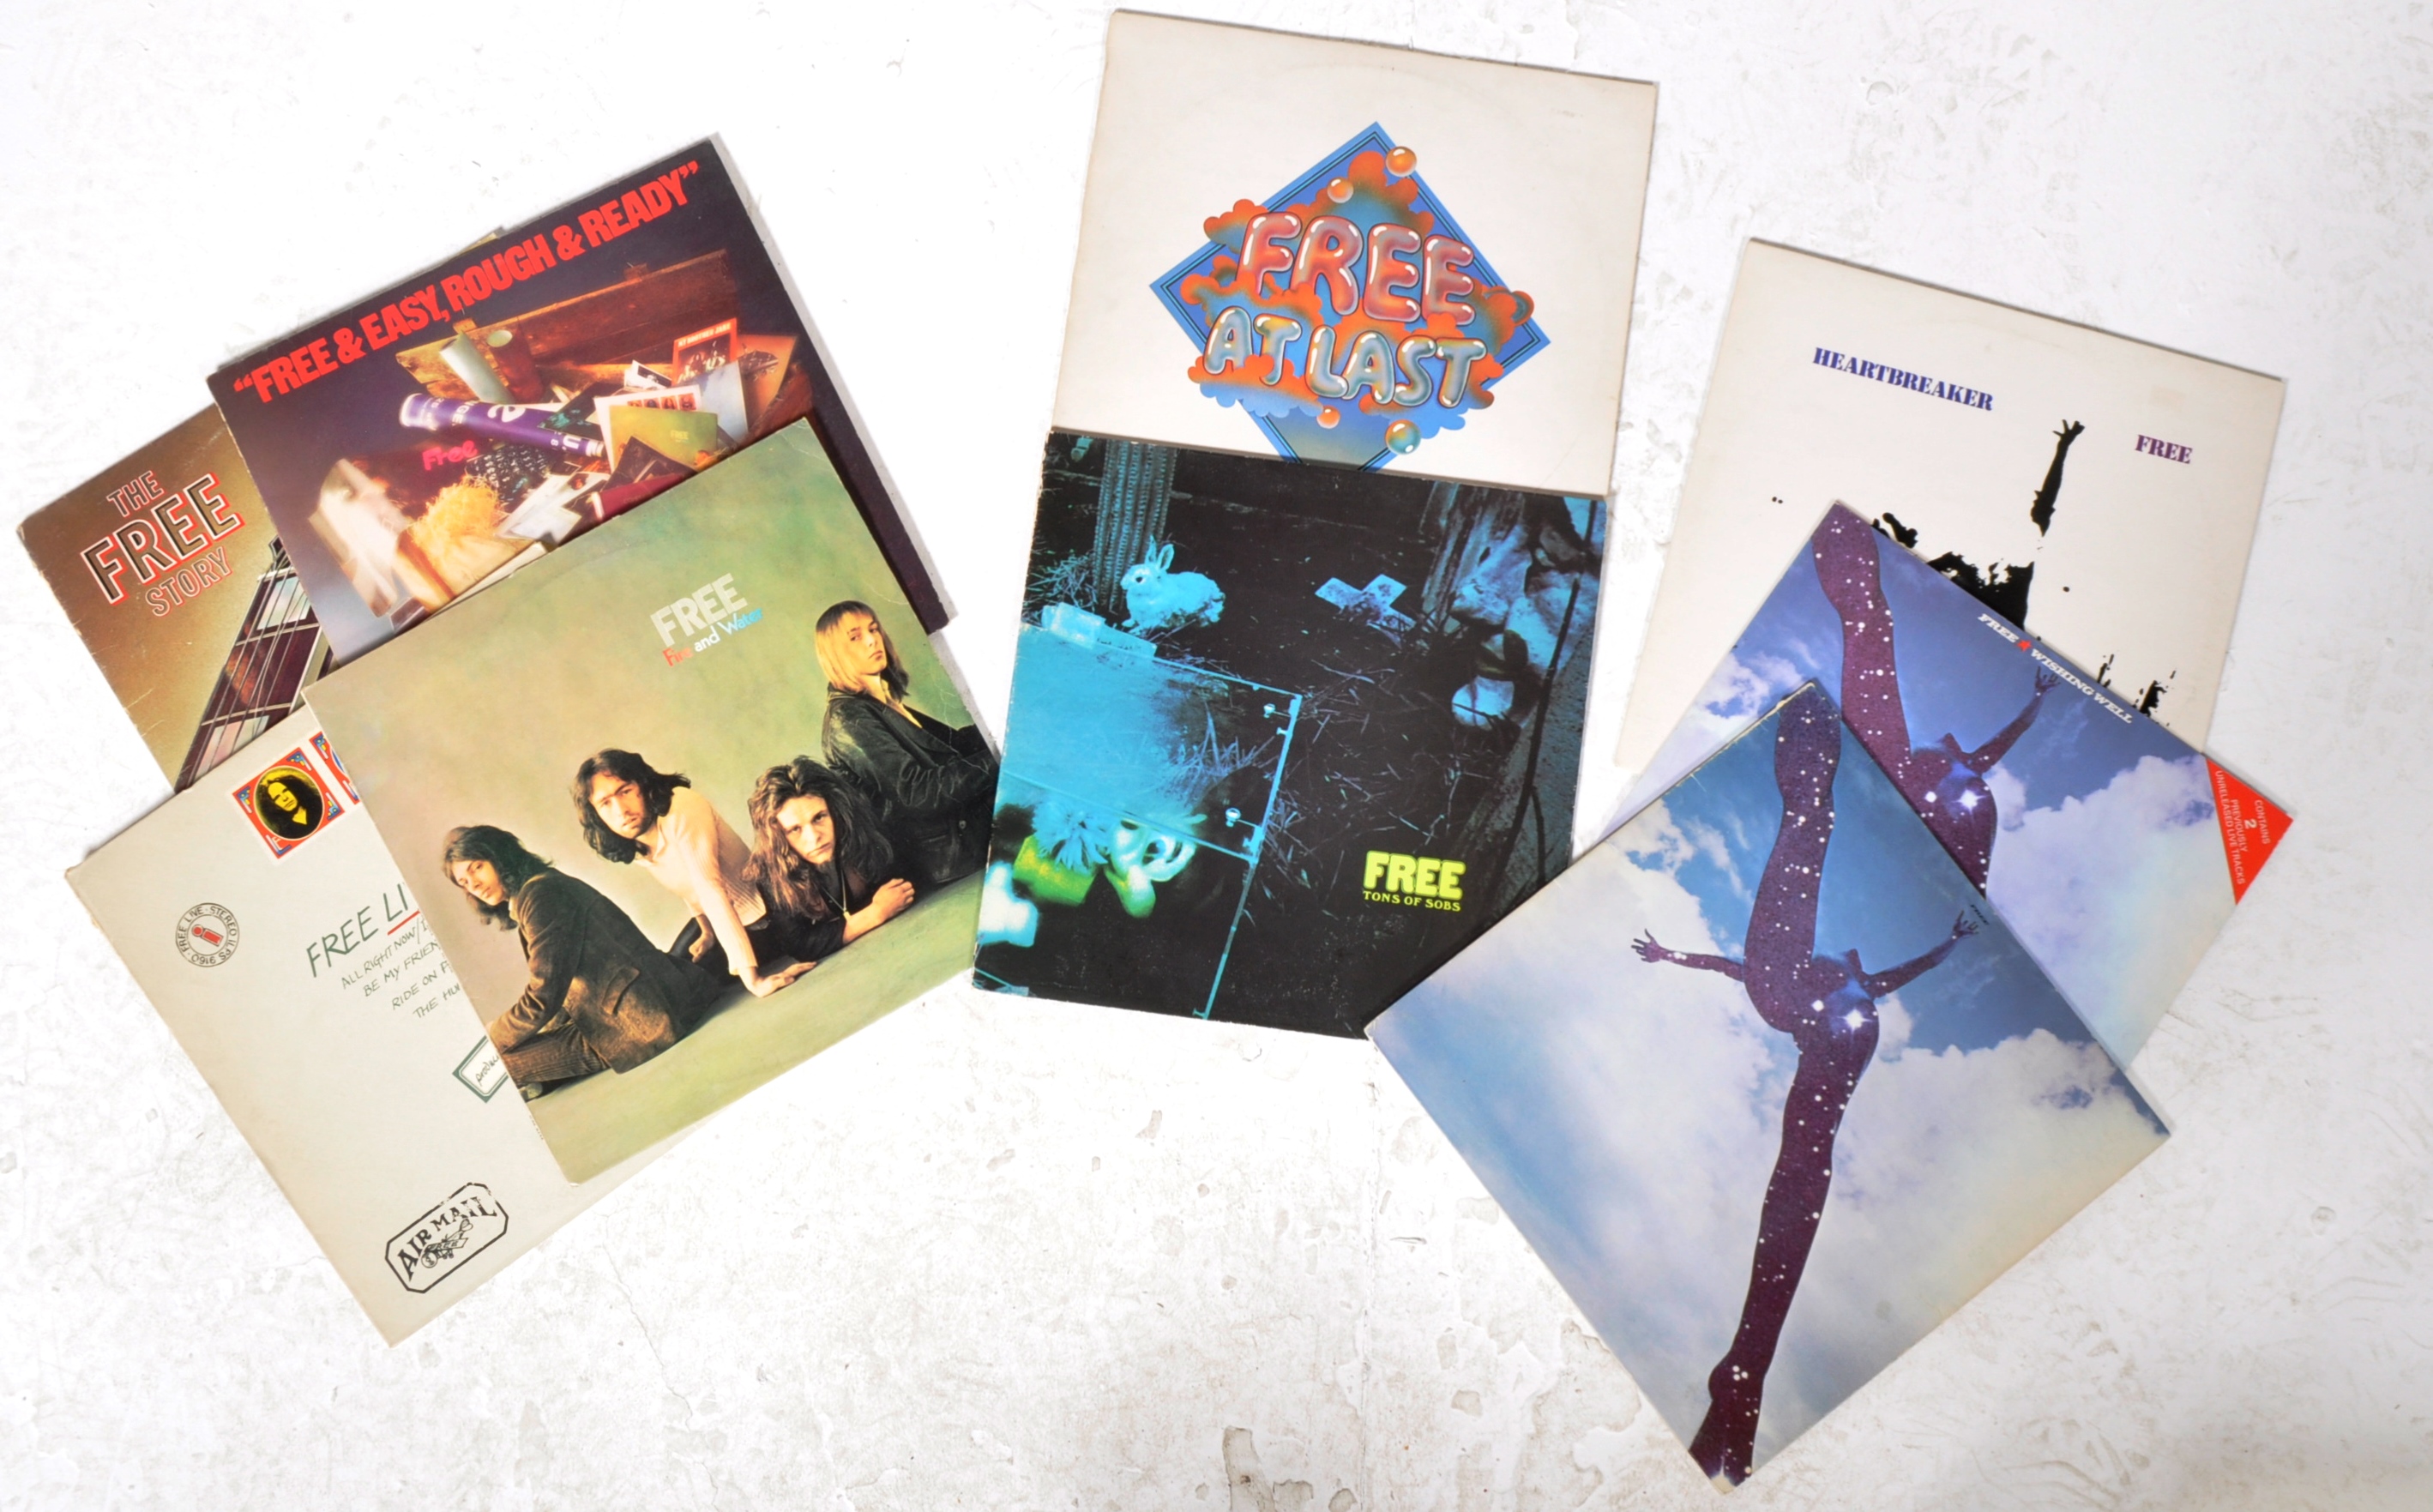 FREE - SELECTION OF VINYL RECORD ALBUMS